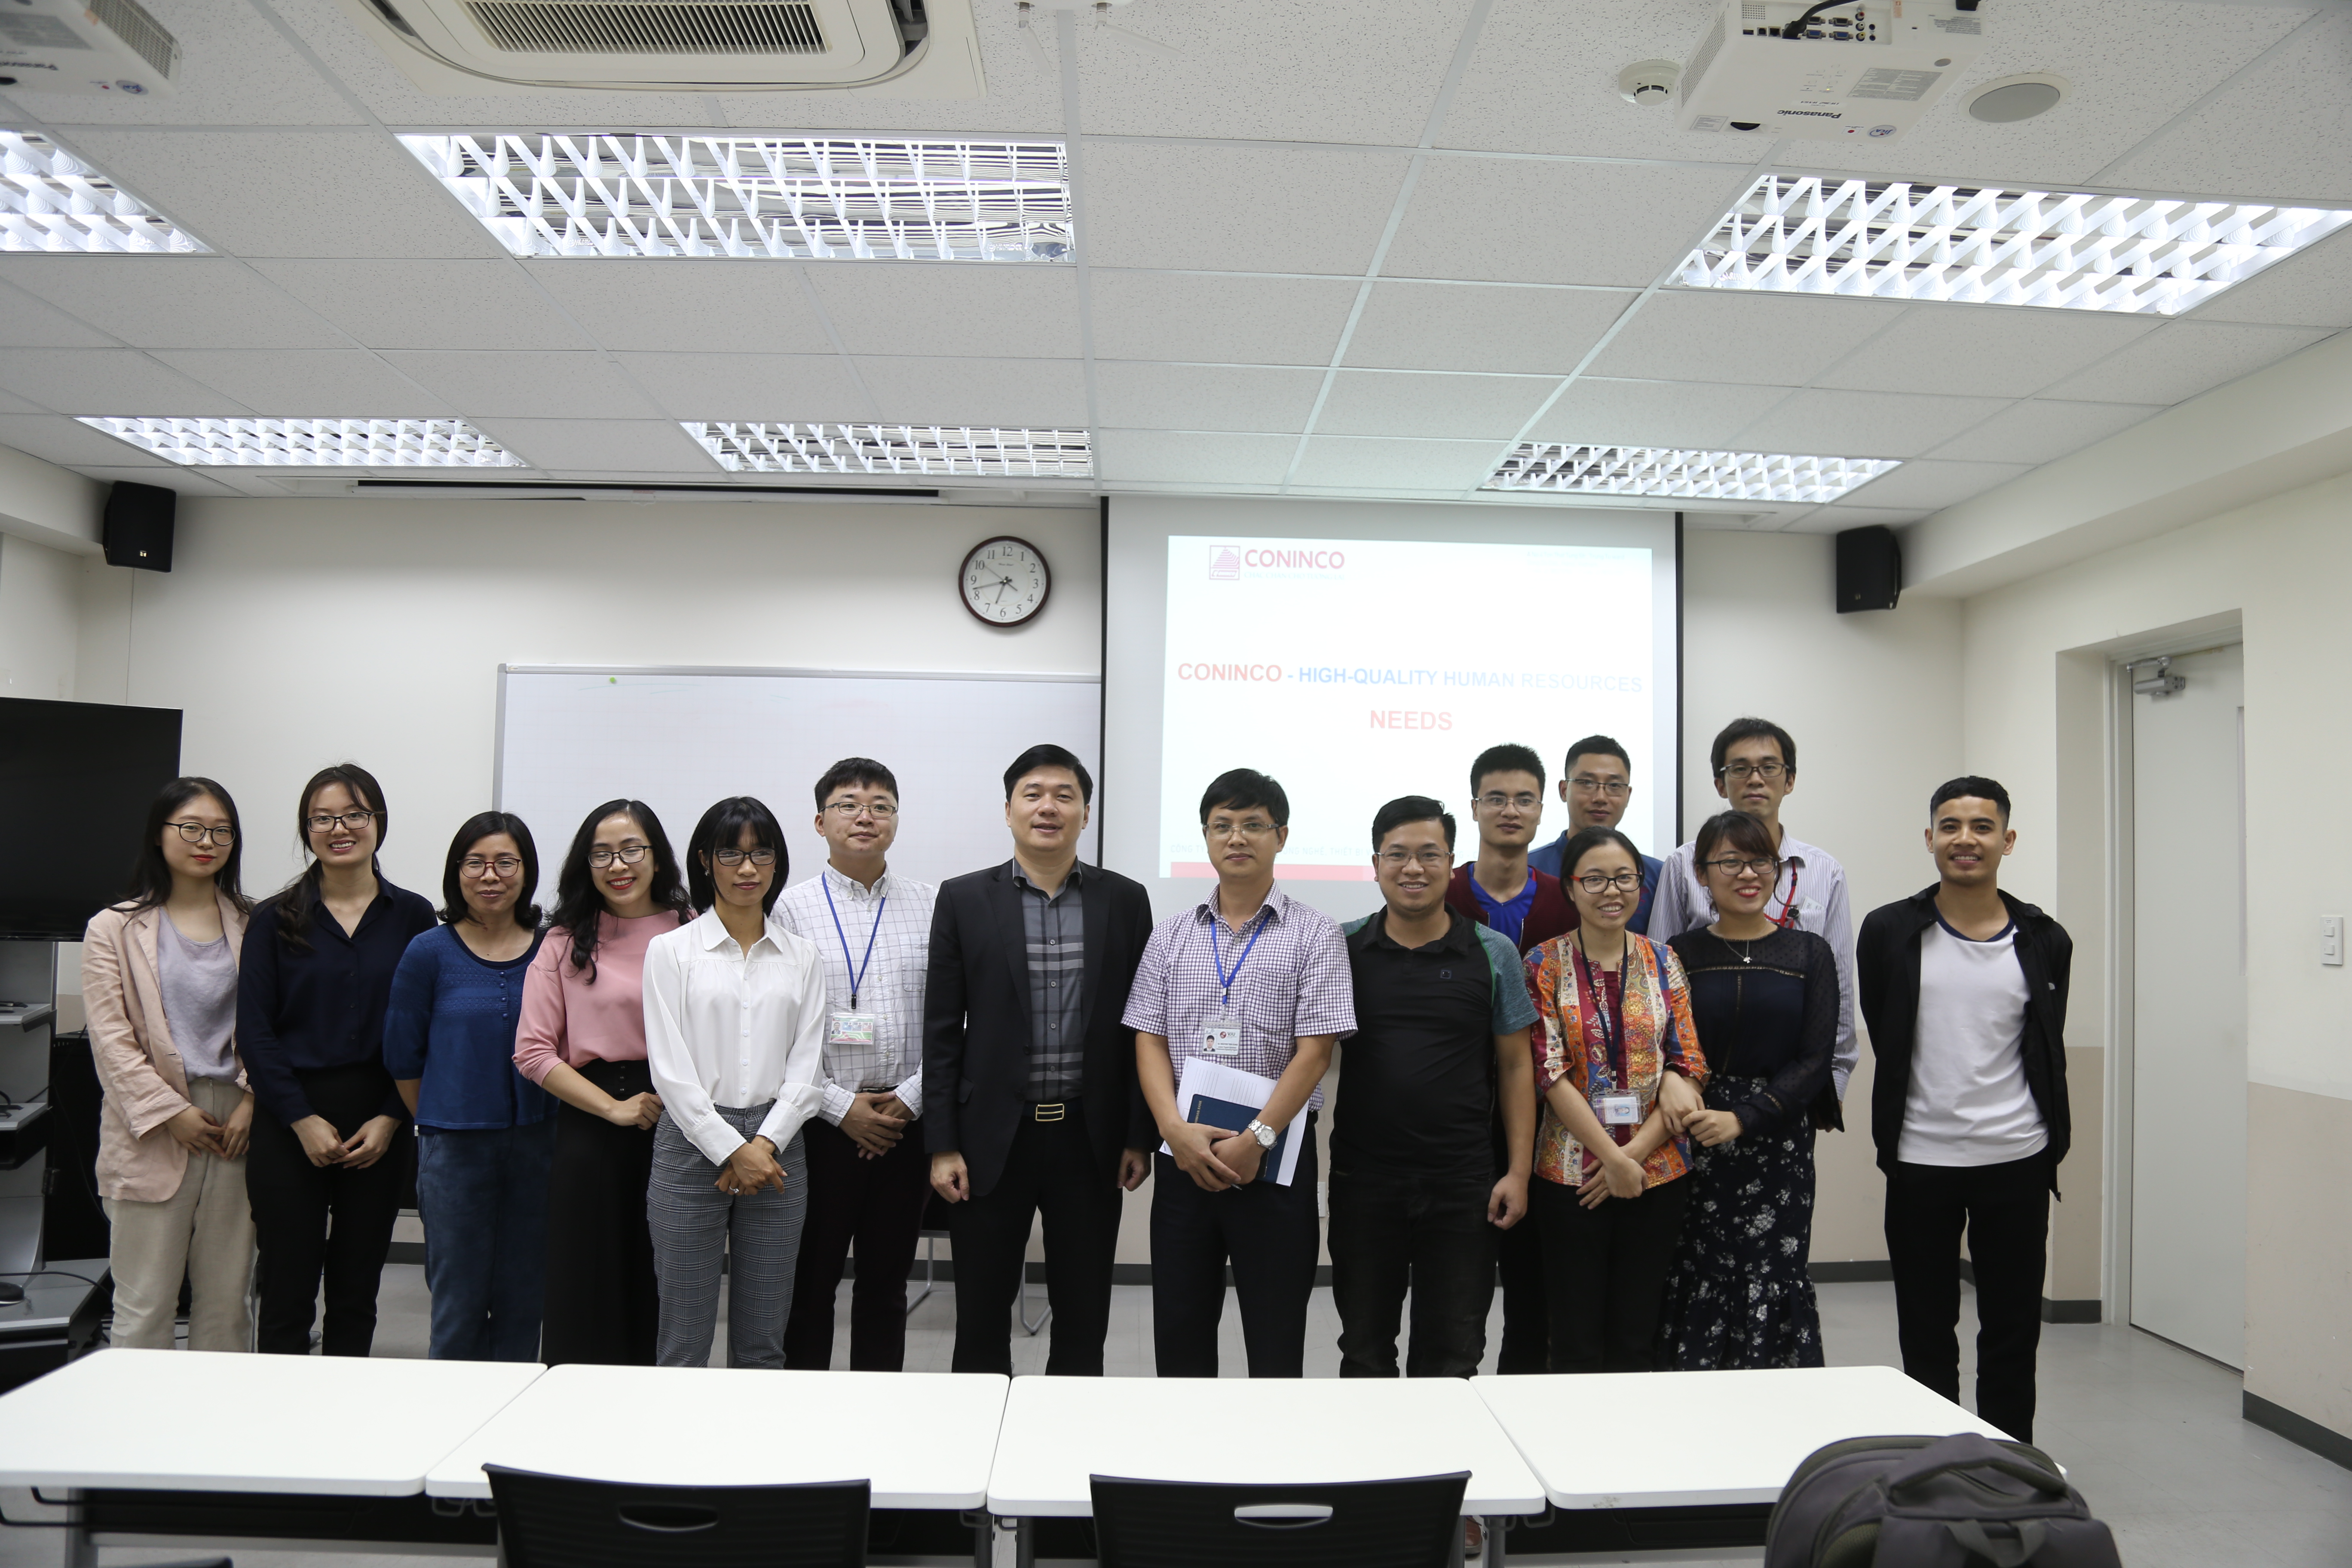 CONINCO participated in a career counseling session at Vietnam Japan University